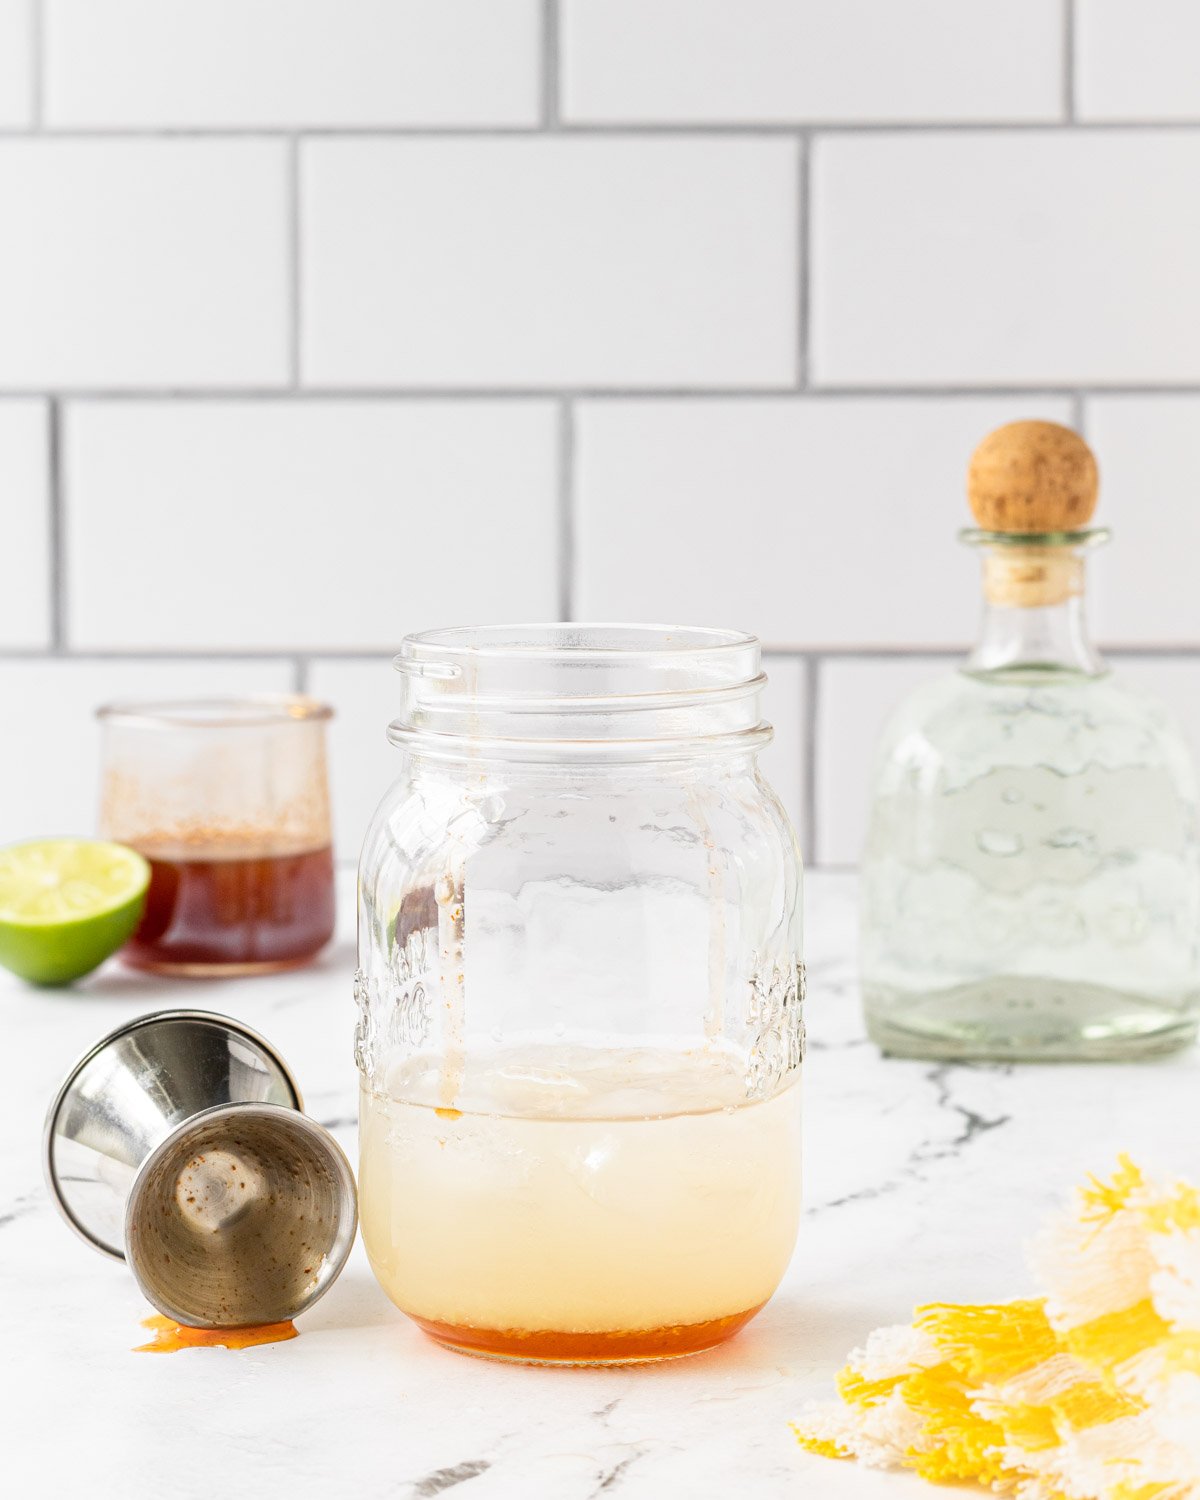 Hot honey added to mason jar with other ingredients.